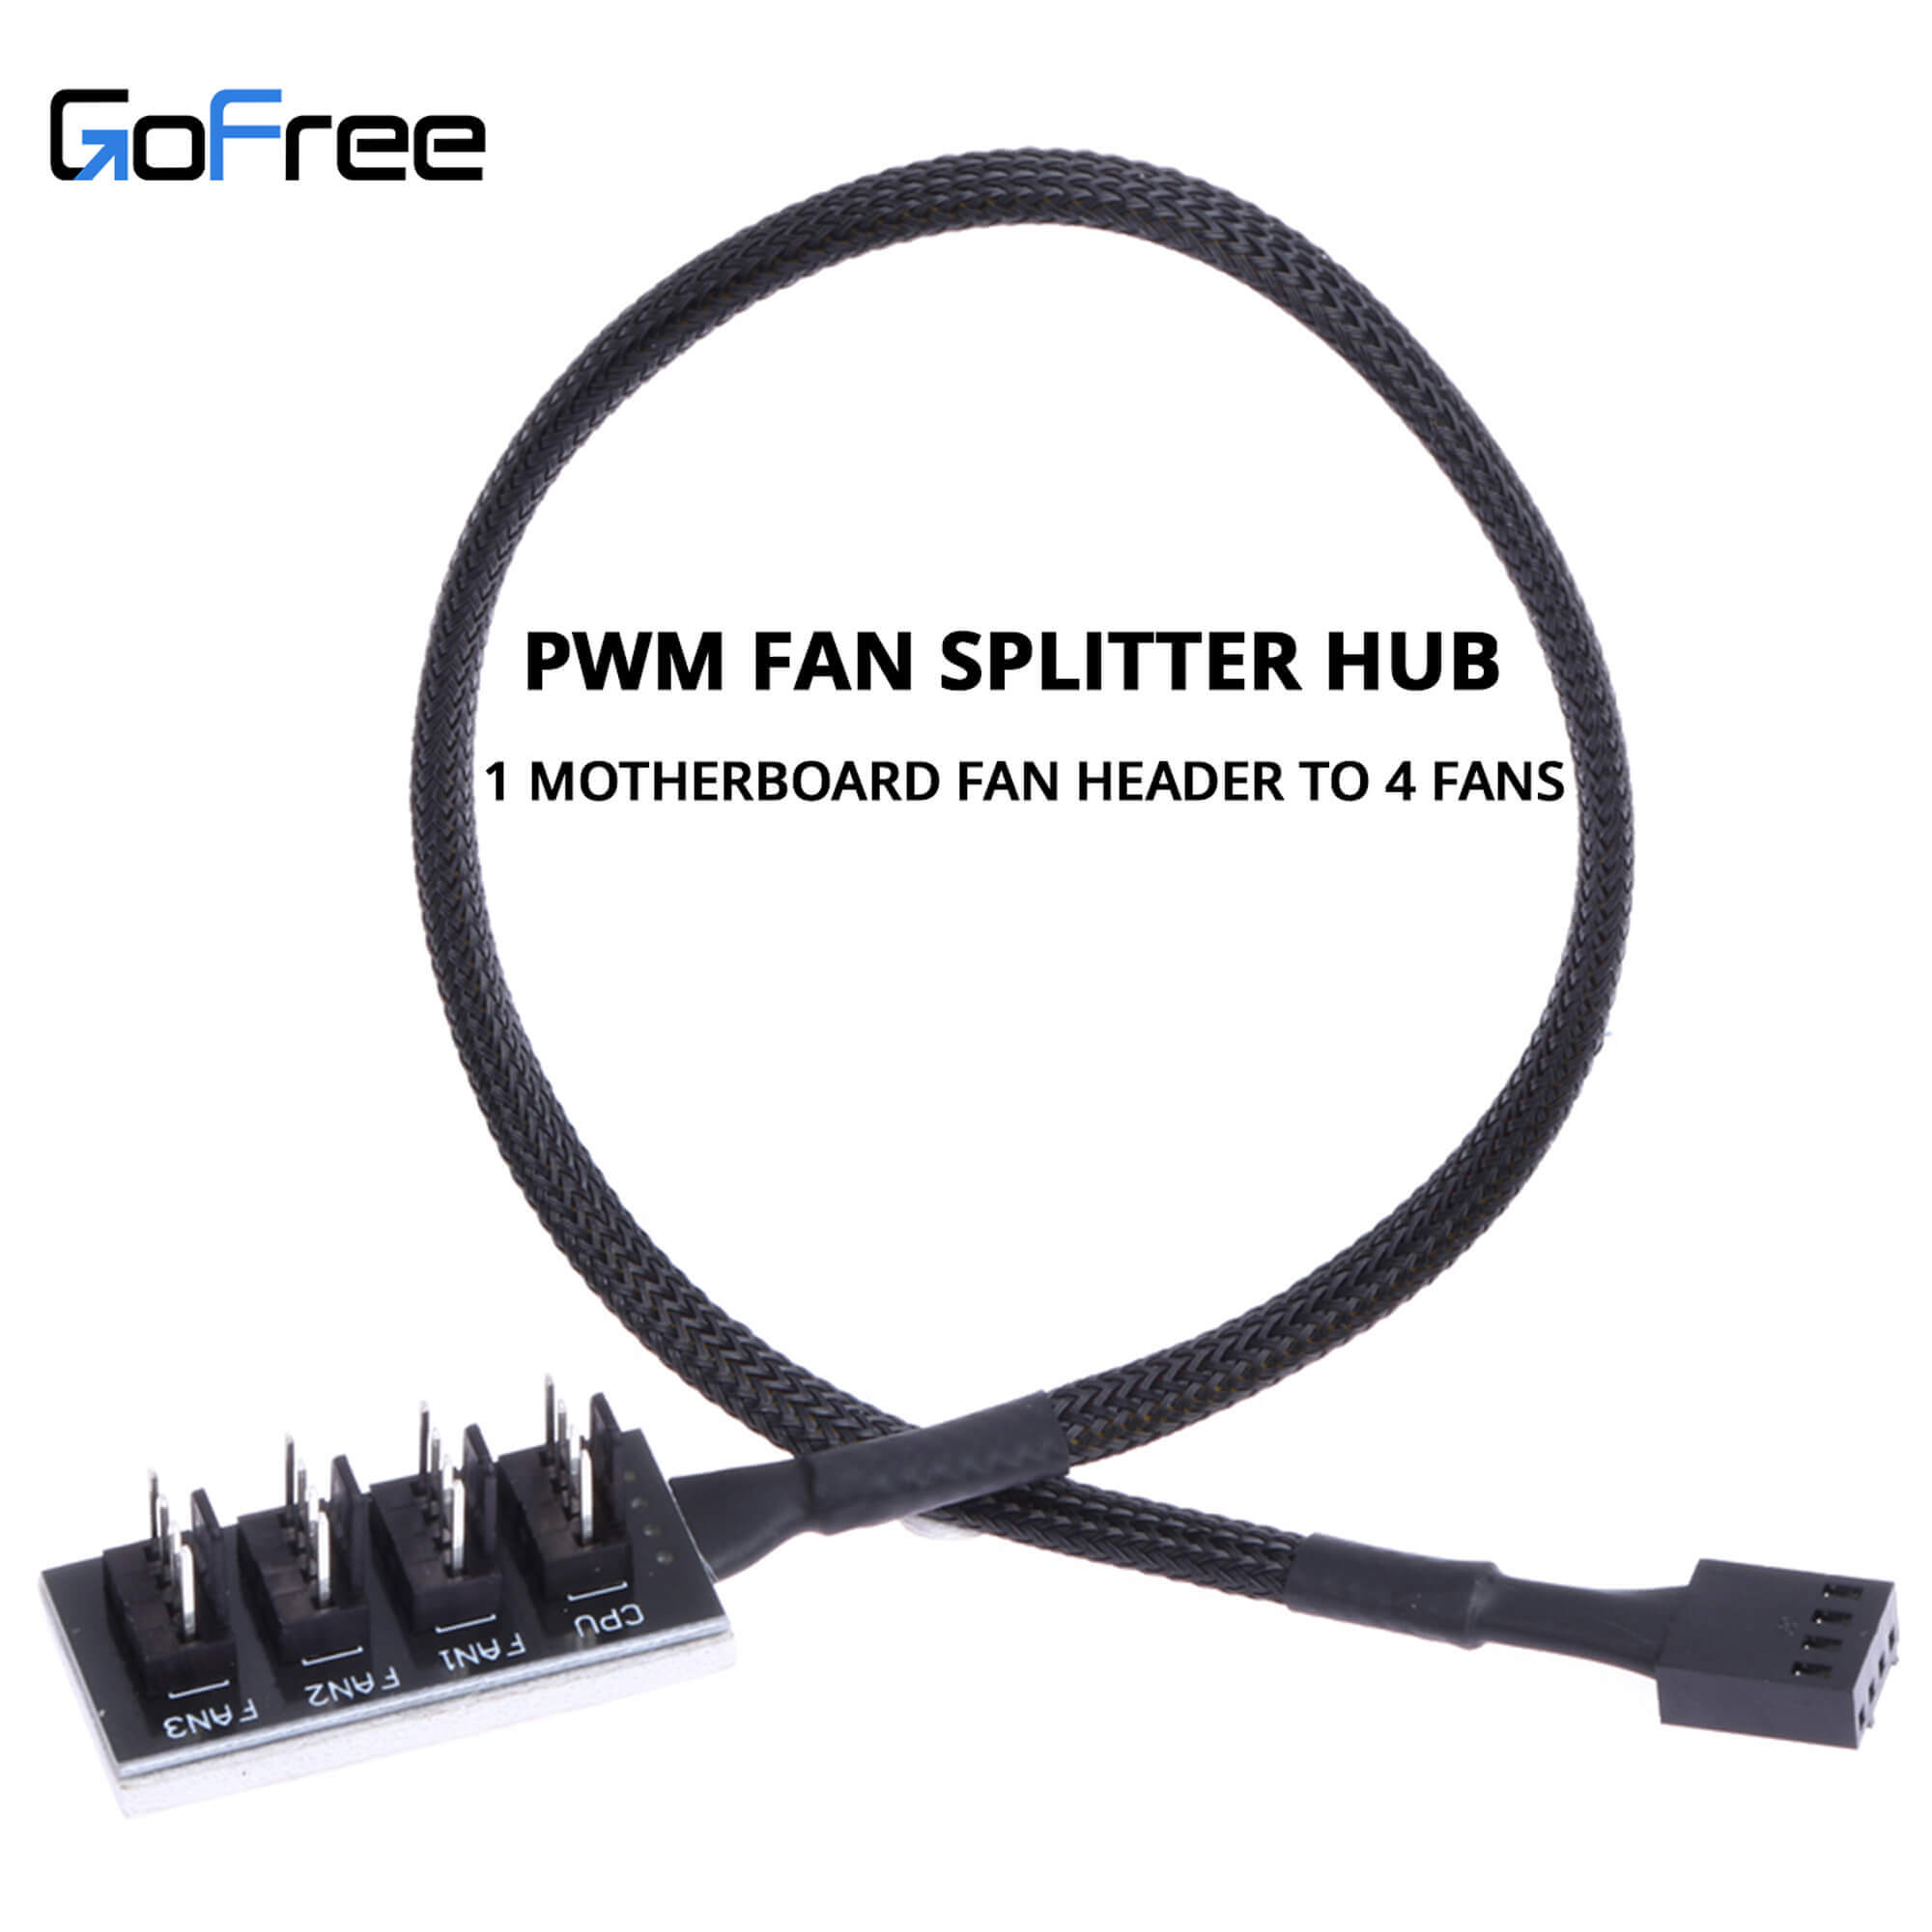 GoFree PC PWM Fan Splitter Y Cable Adapter 1 to 4 [1 Motherboard Fan Header To 4 Fans] [Nylon Braided] (38cm / 1 to 4) |